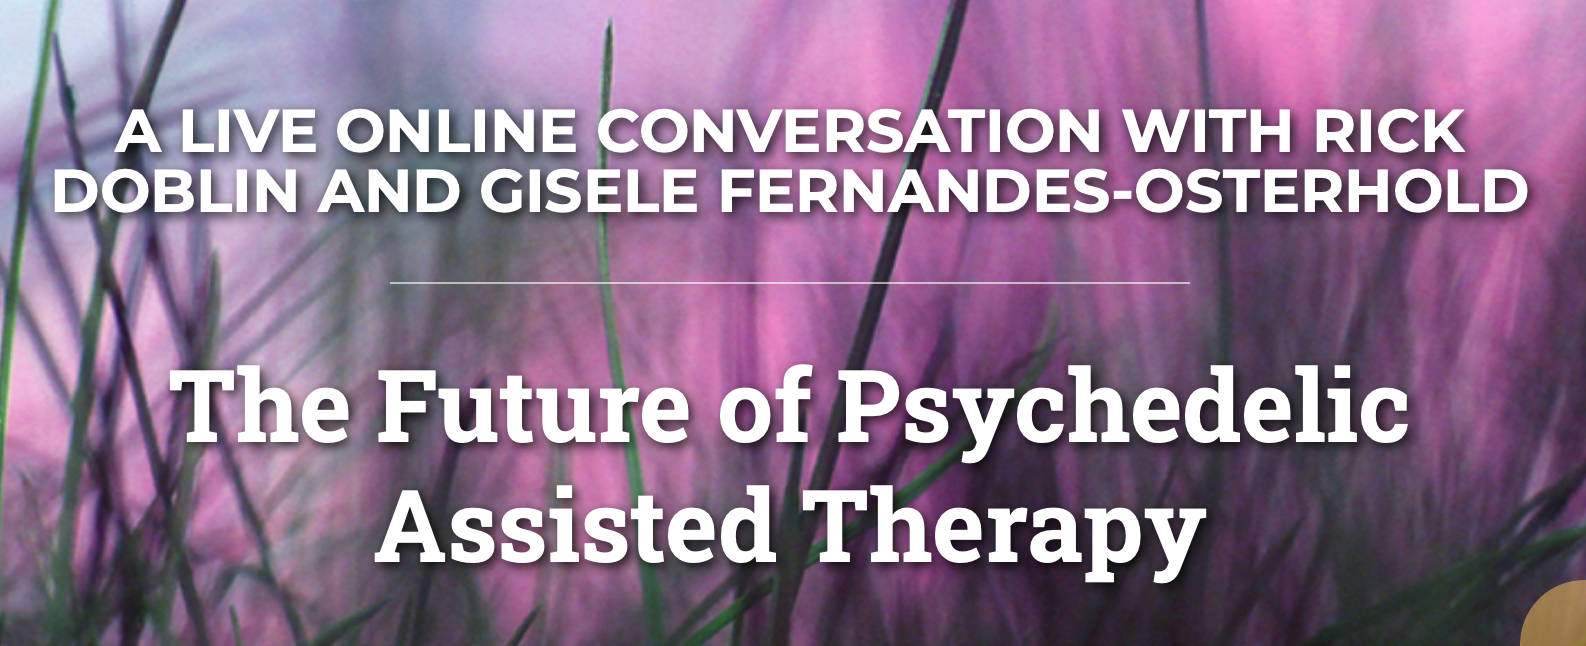 The Future of Psychedelic Assisted Therapy